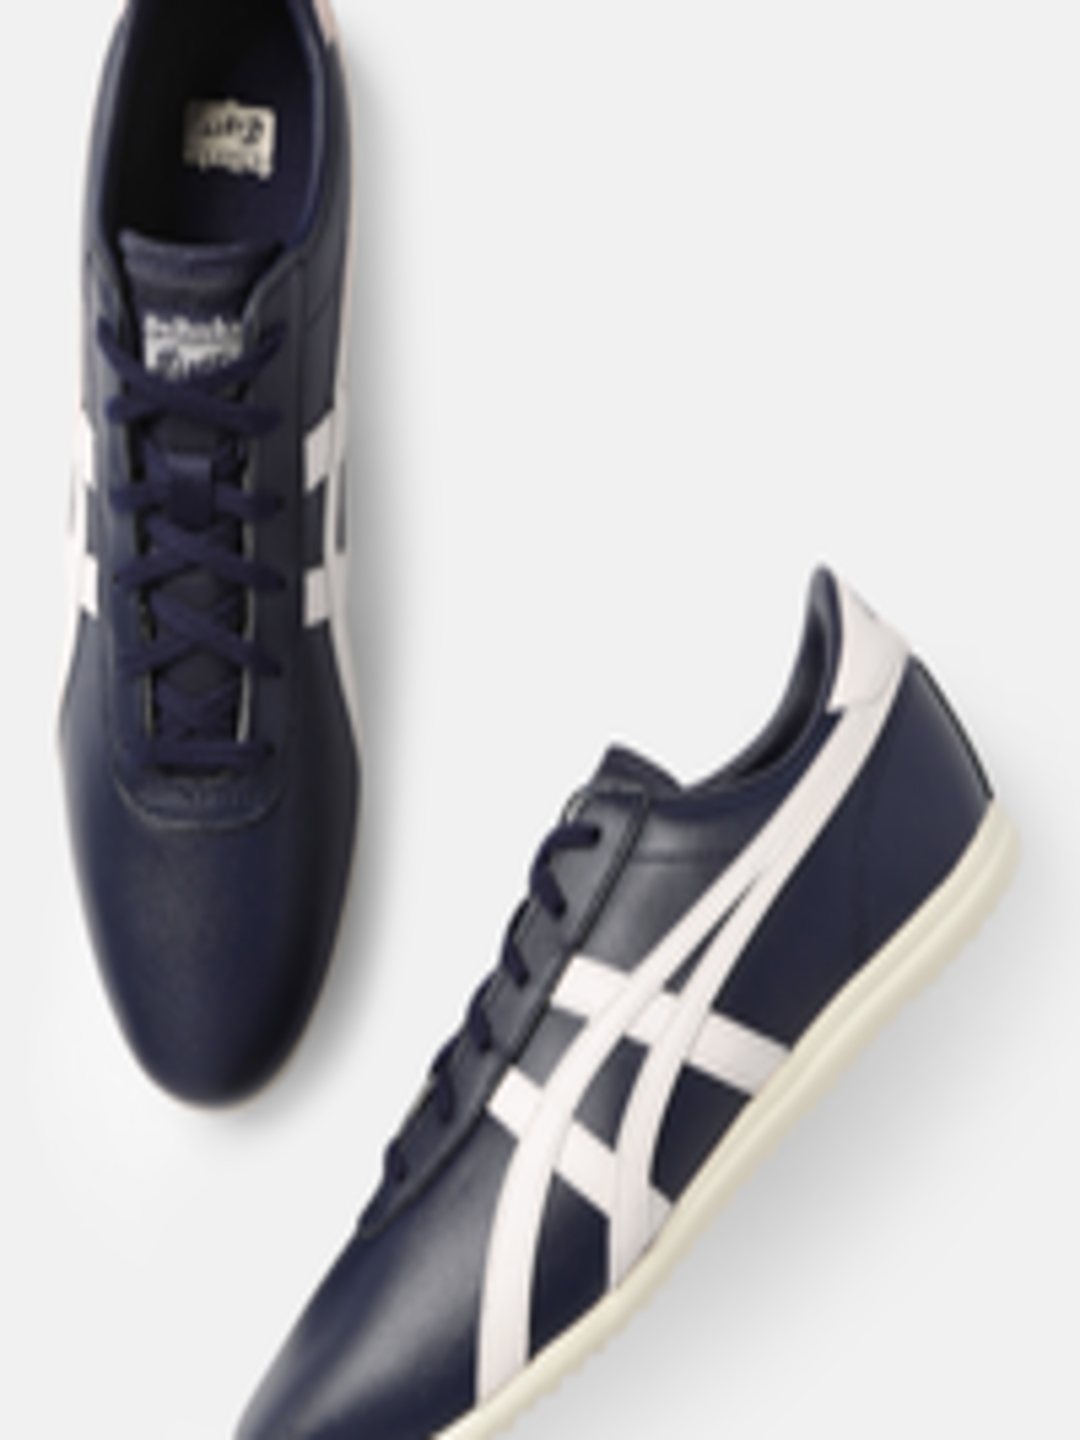 Buy Onitsuka Tiger Unisex Blue Sneakers Tai Chi Reb - Casual Shoes for